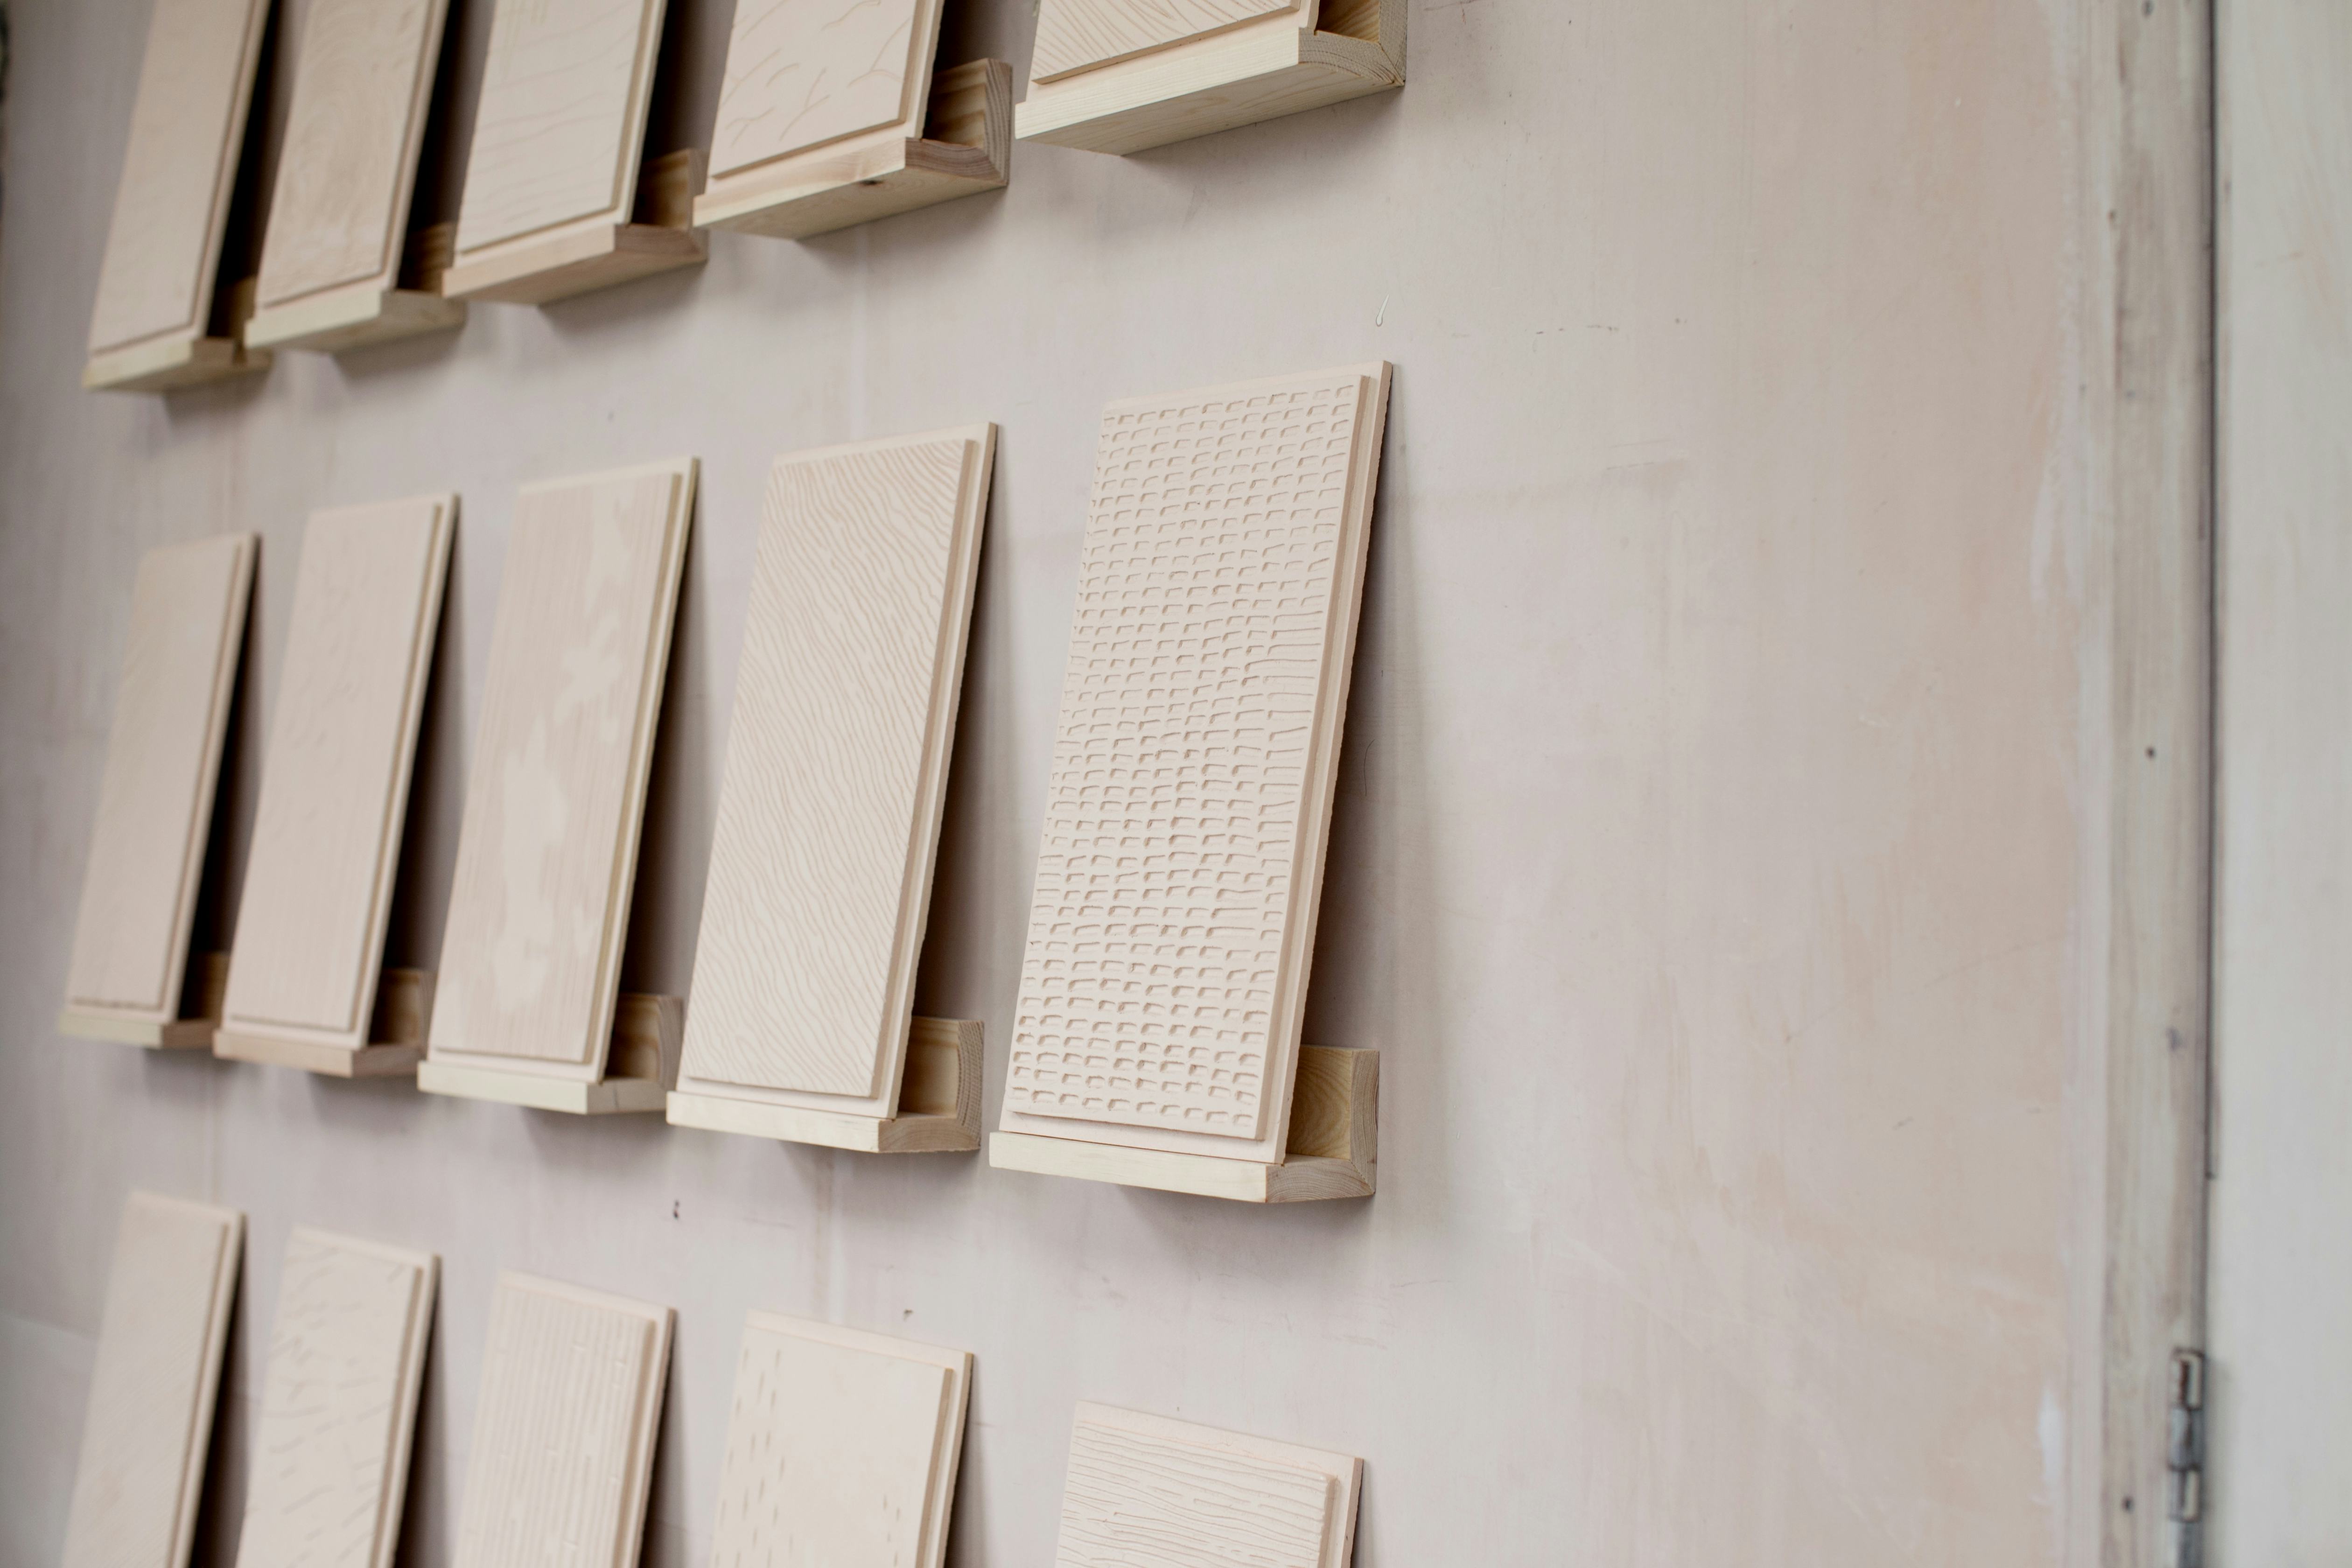 Clay tiles with handmade markings sit on individual wall shelves